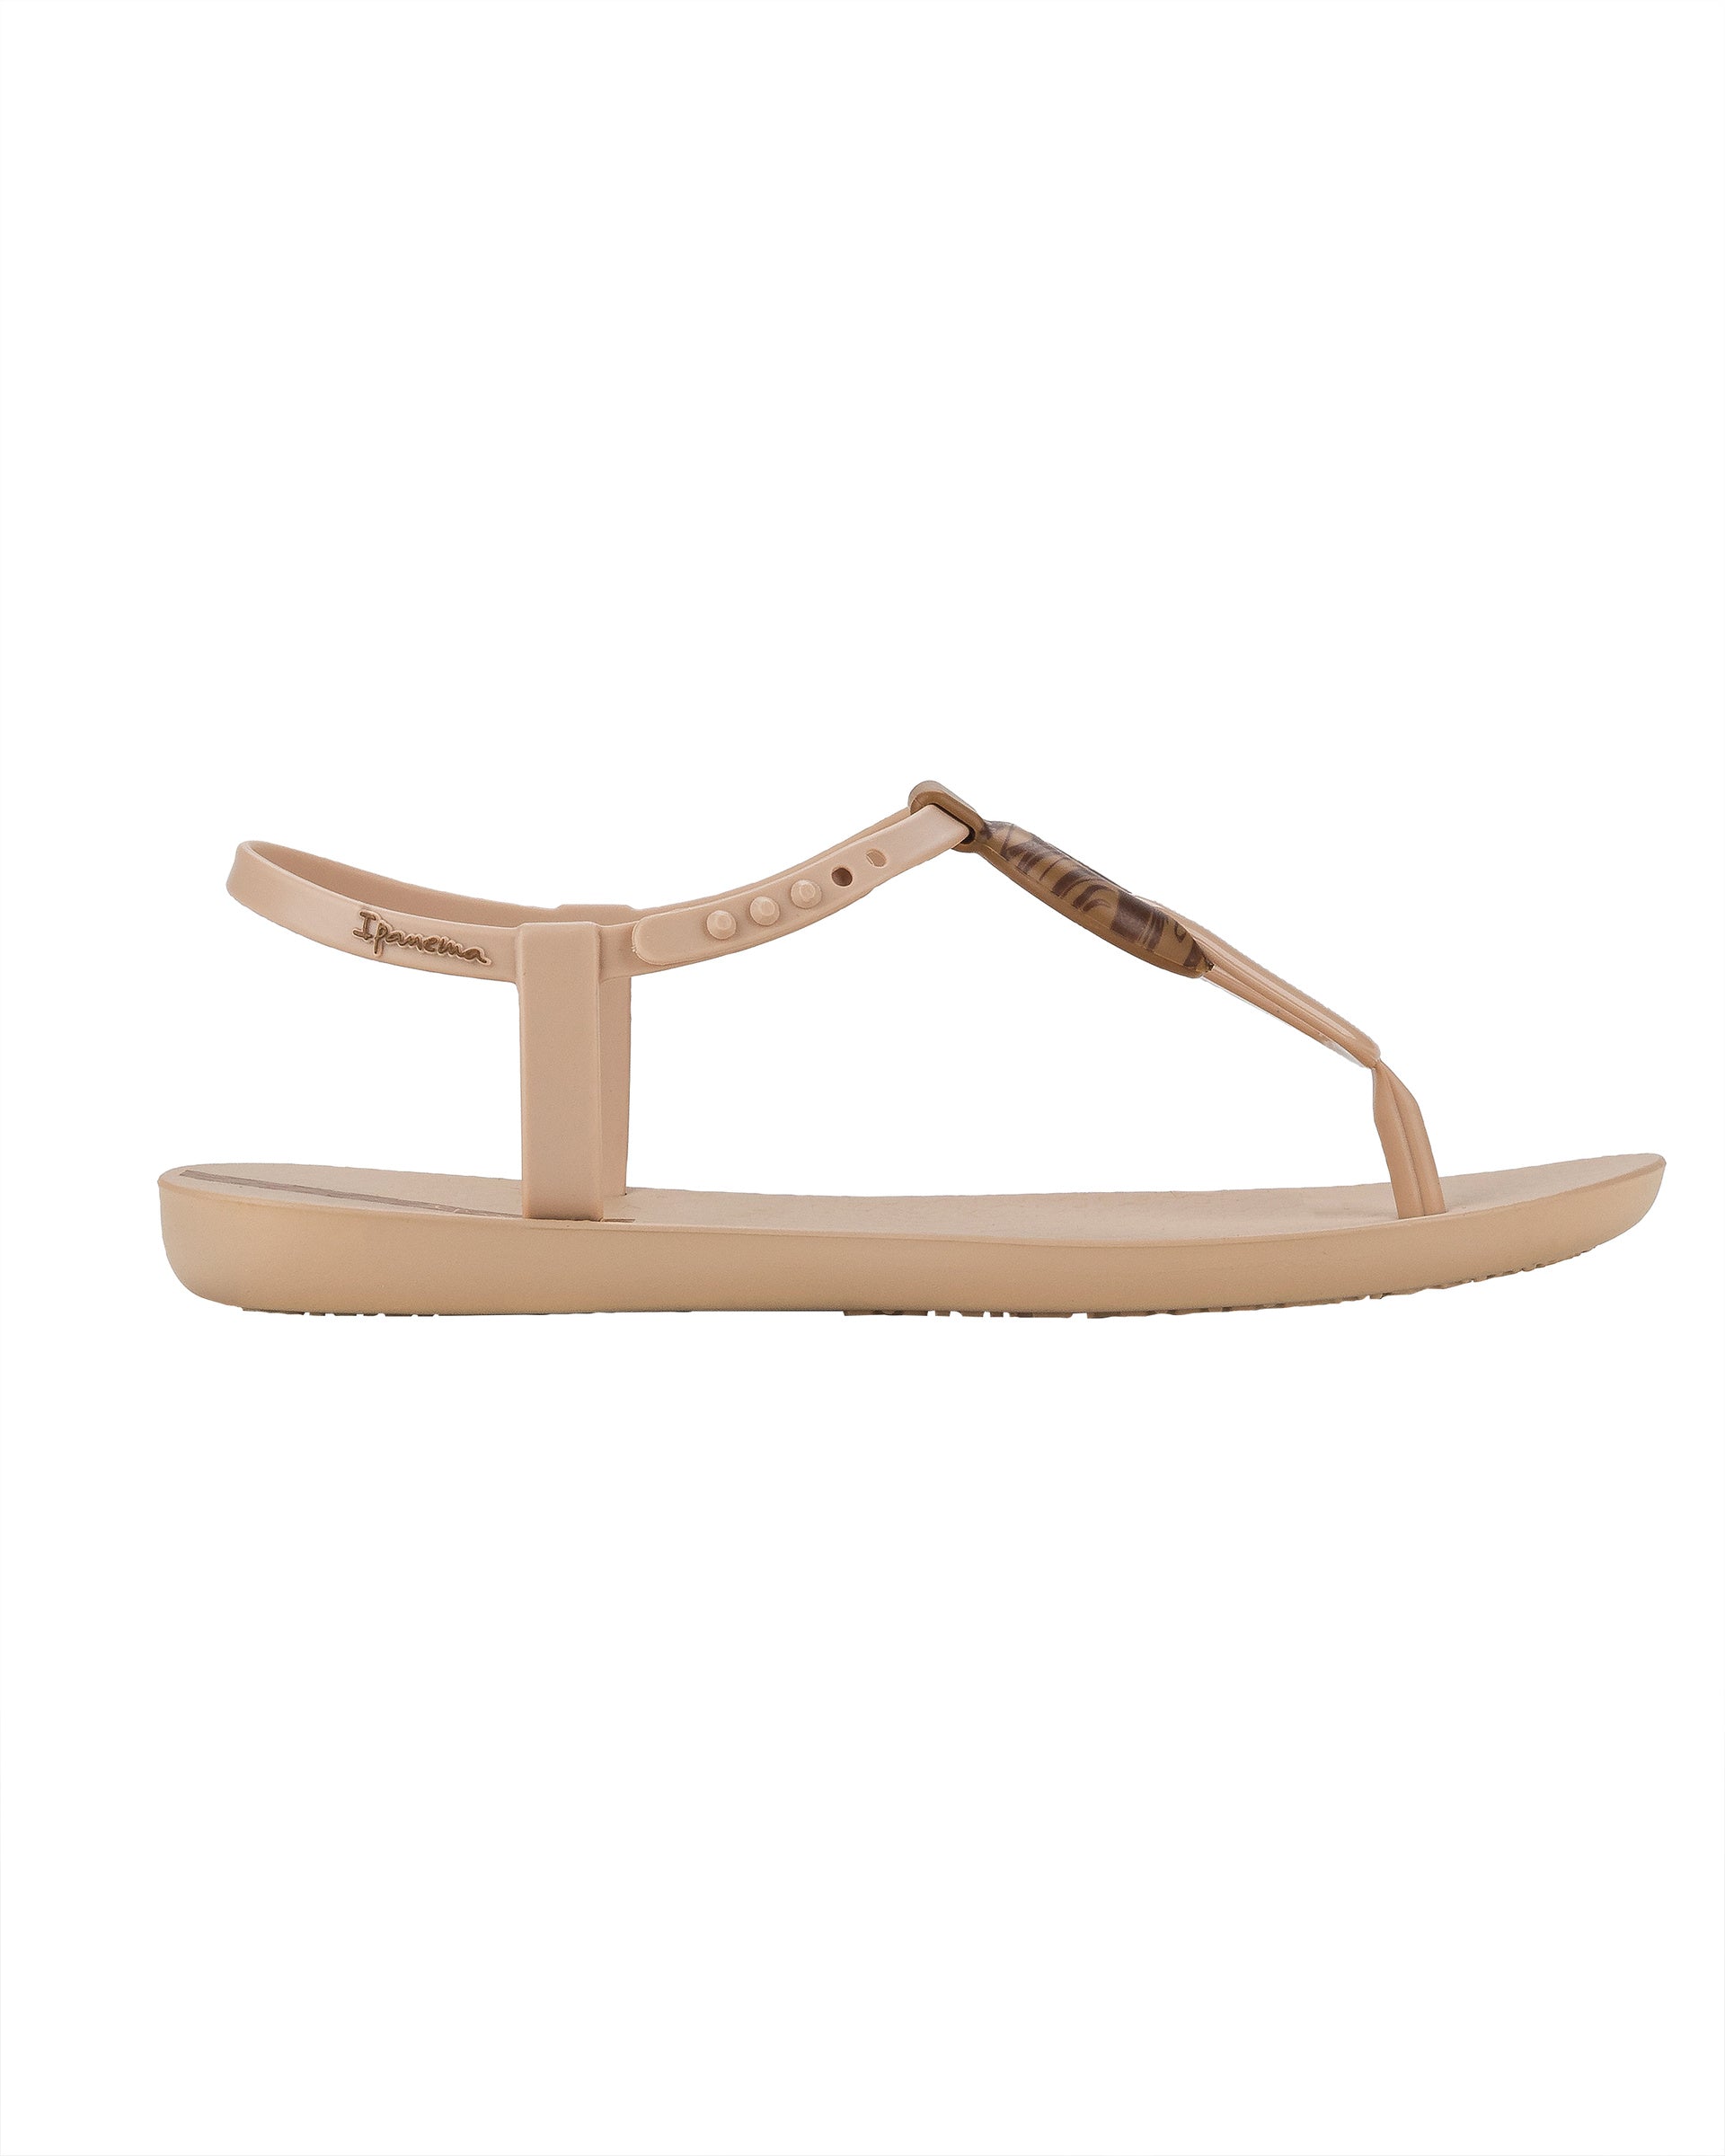 Outer side view of a beige Ipanema Class Marble women's t-strap sandal.